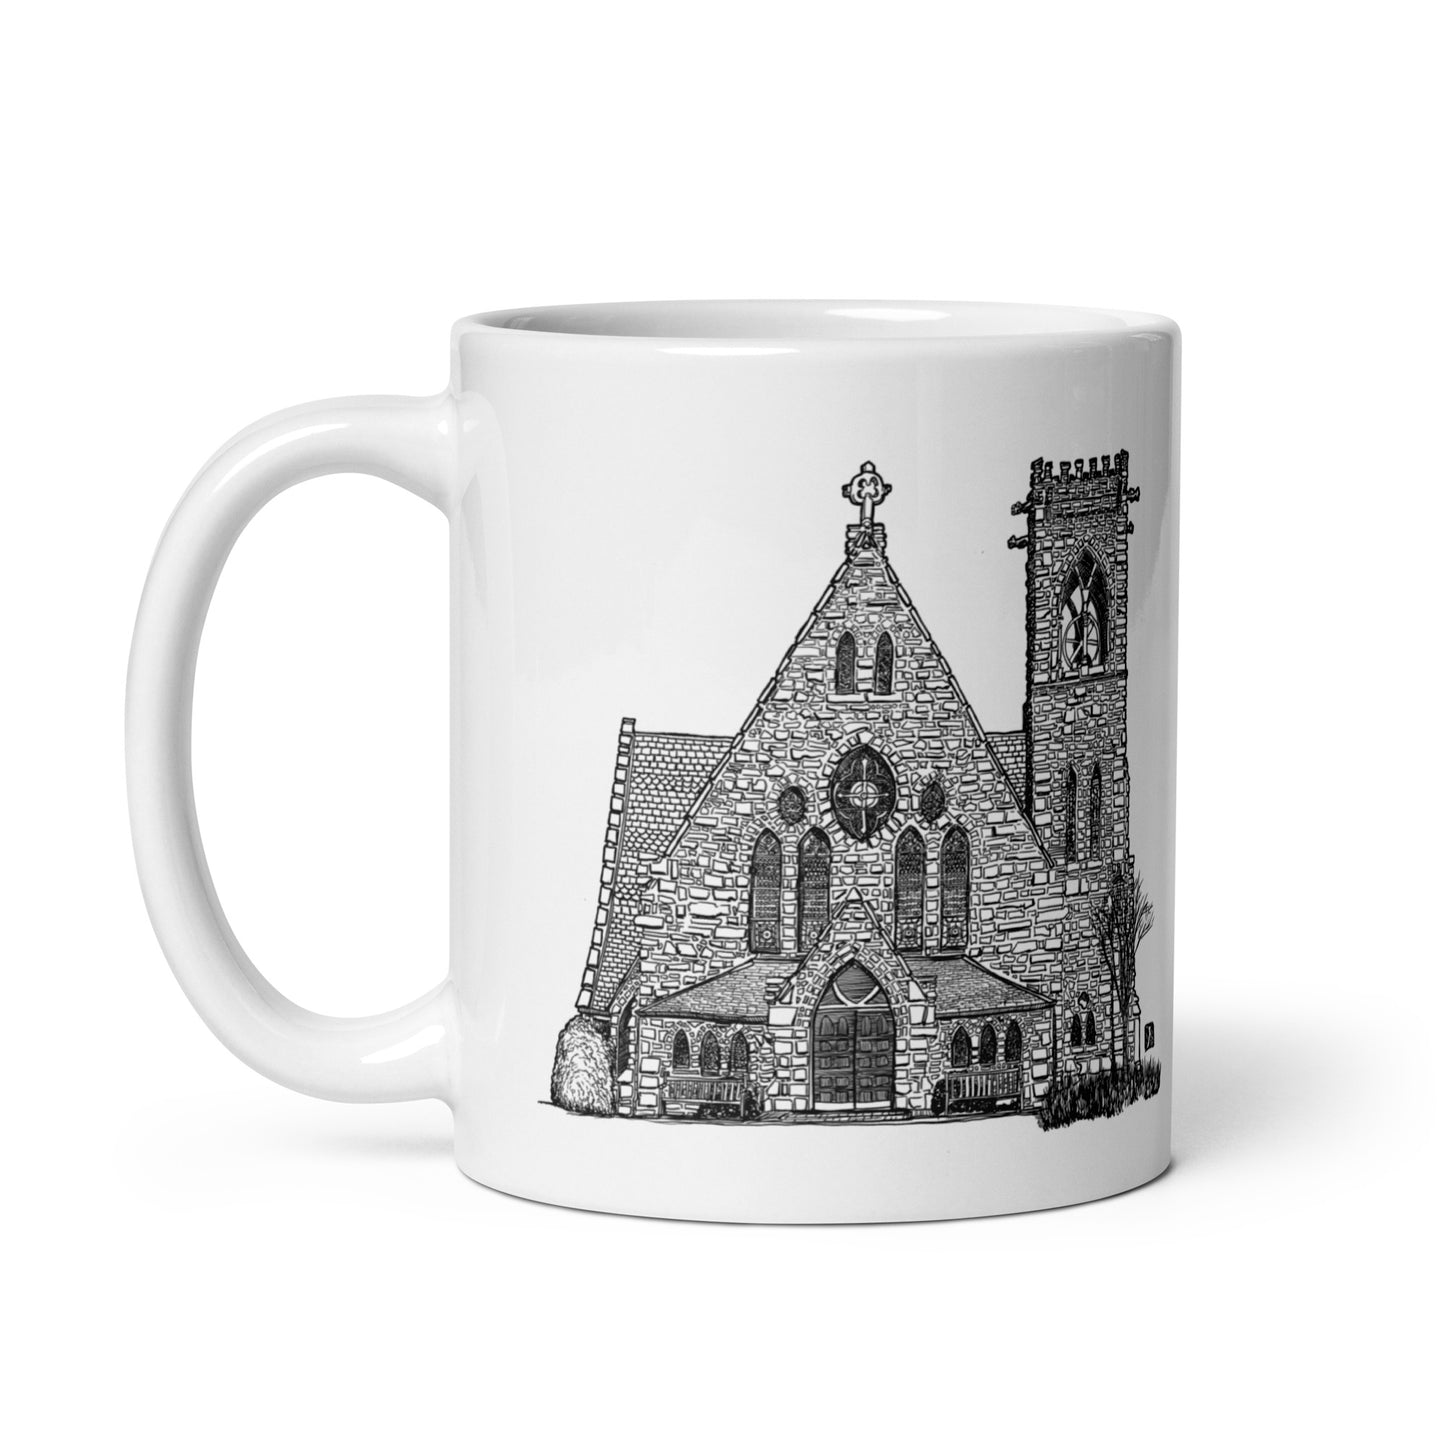 BellavanceInk: 11 Oz White Coffee Mug With Pen And Ink Drawing Of The Chapel At the University Of Virginia (Officially Licensed)